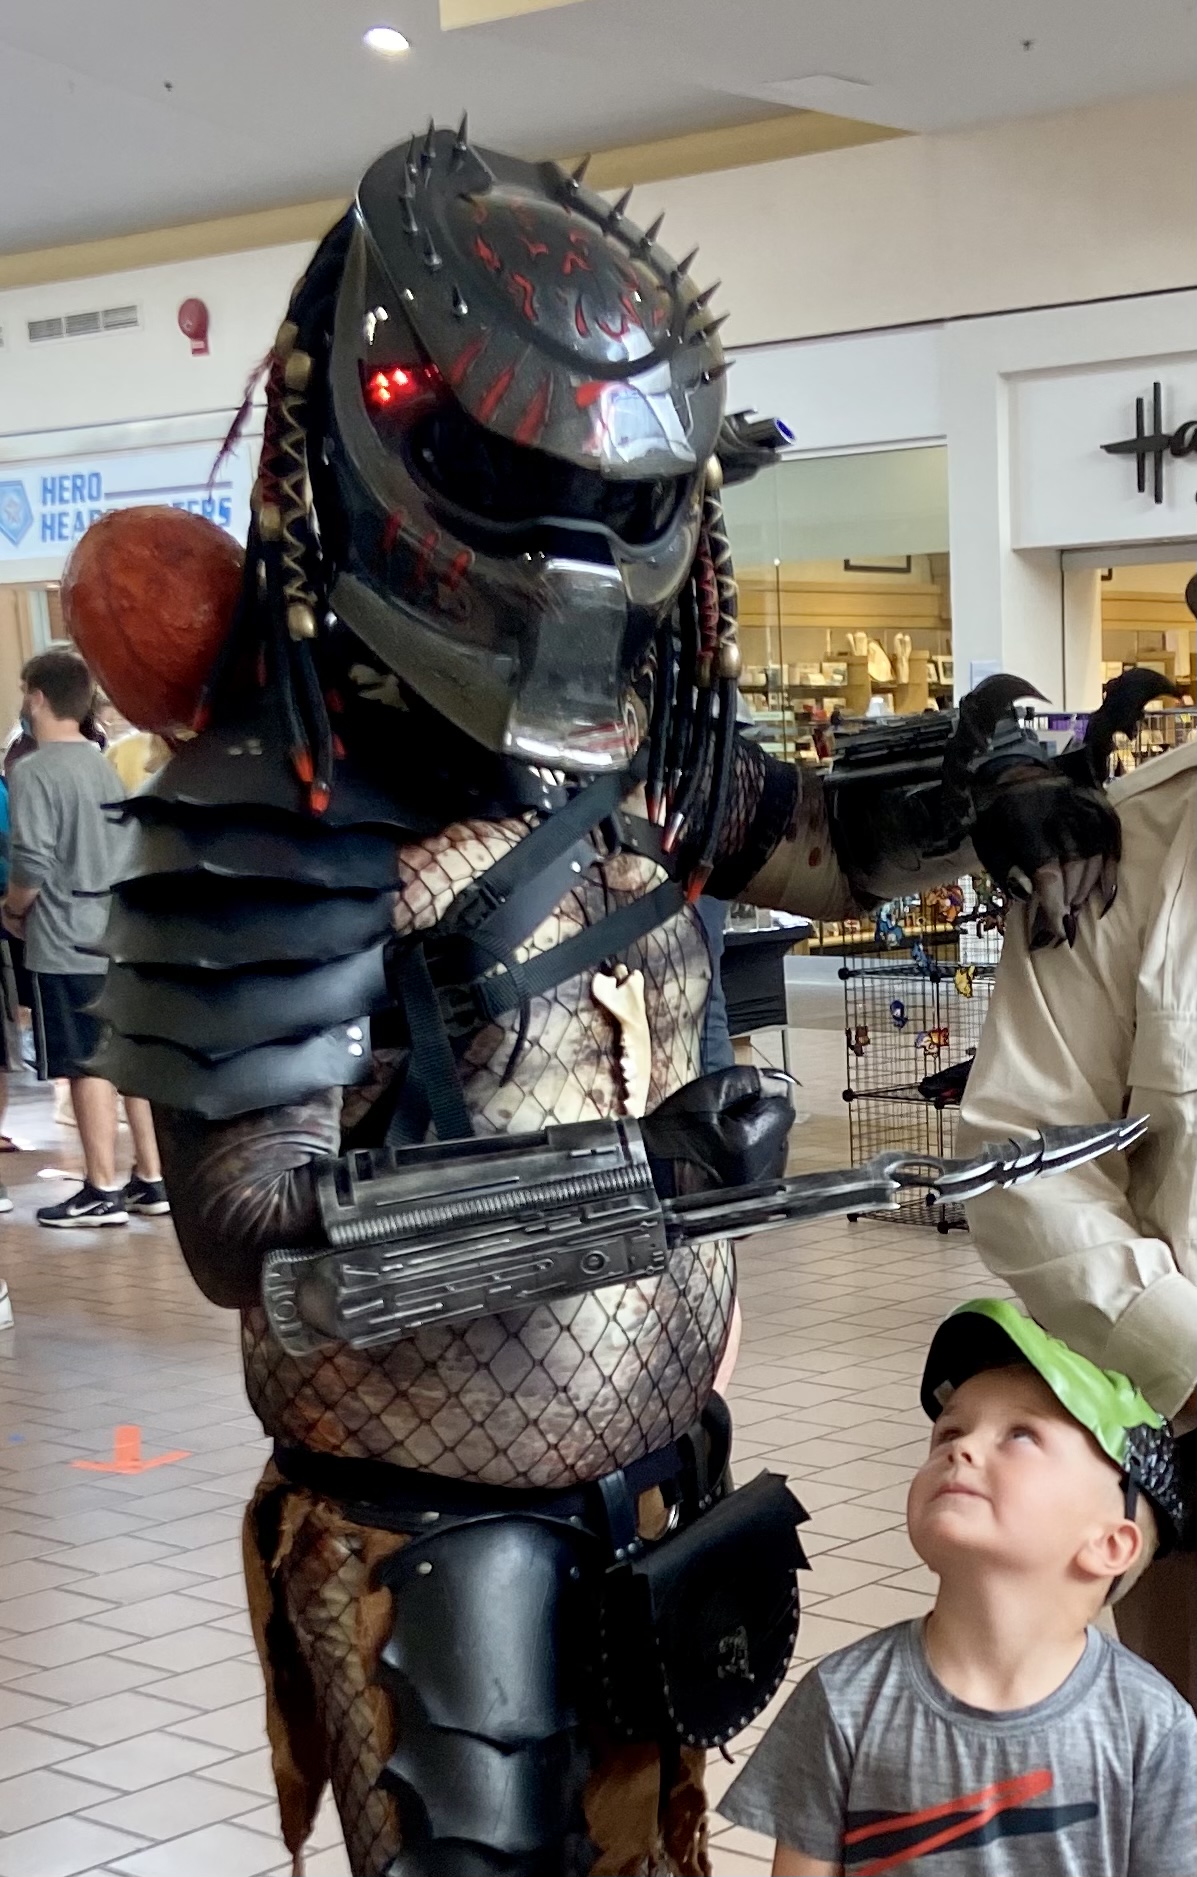 The Predator on the hunt at different Cosplay events.